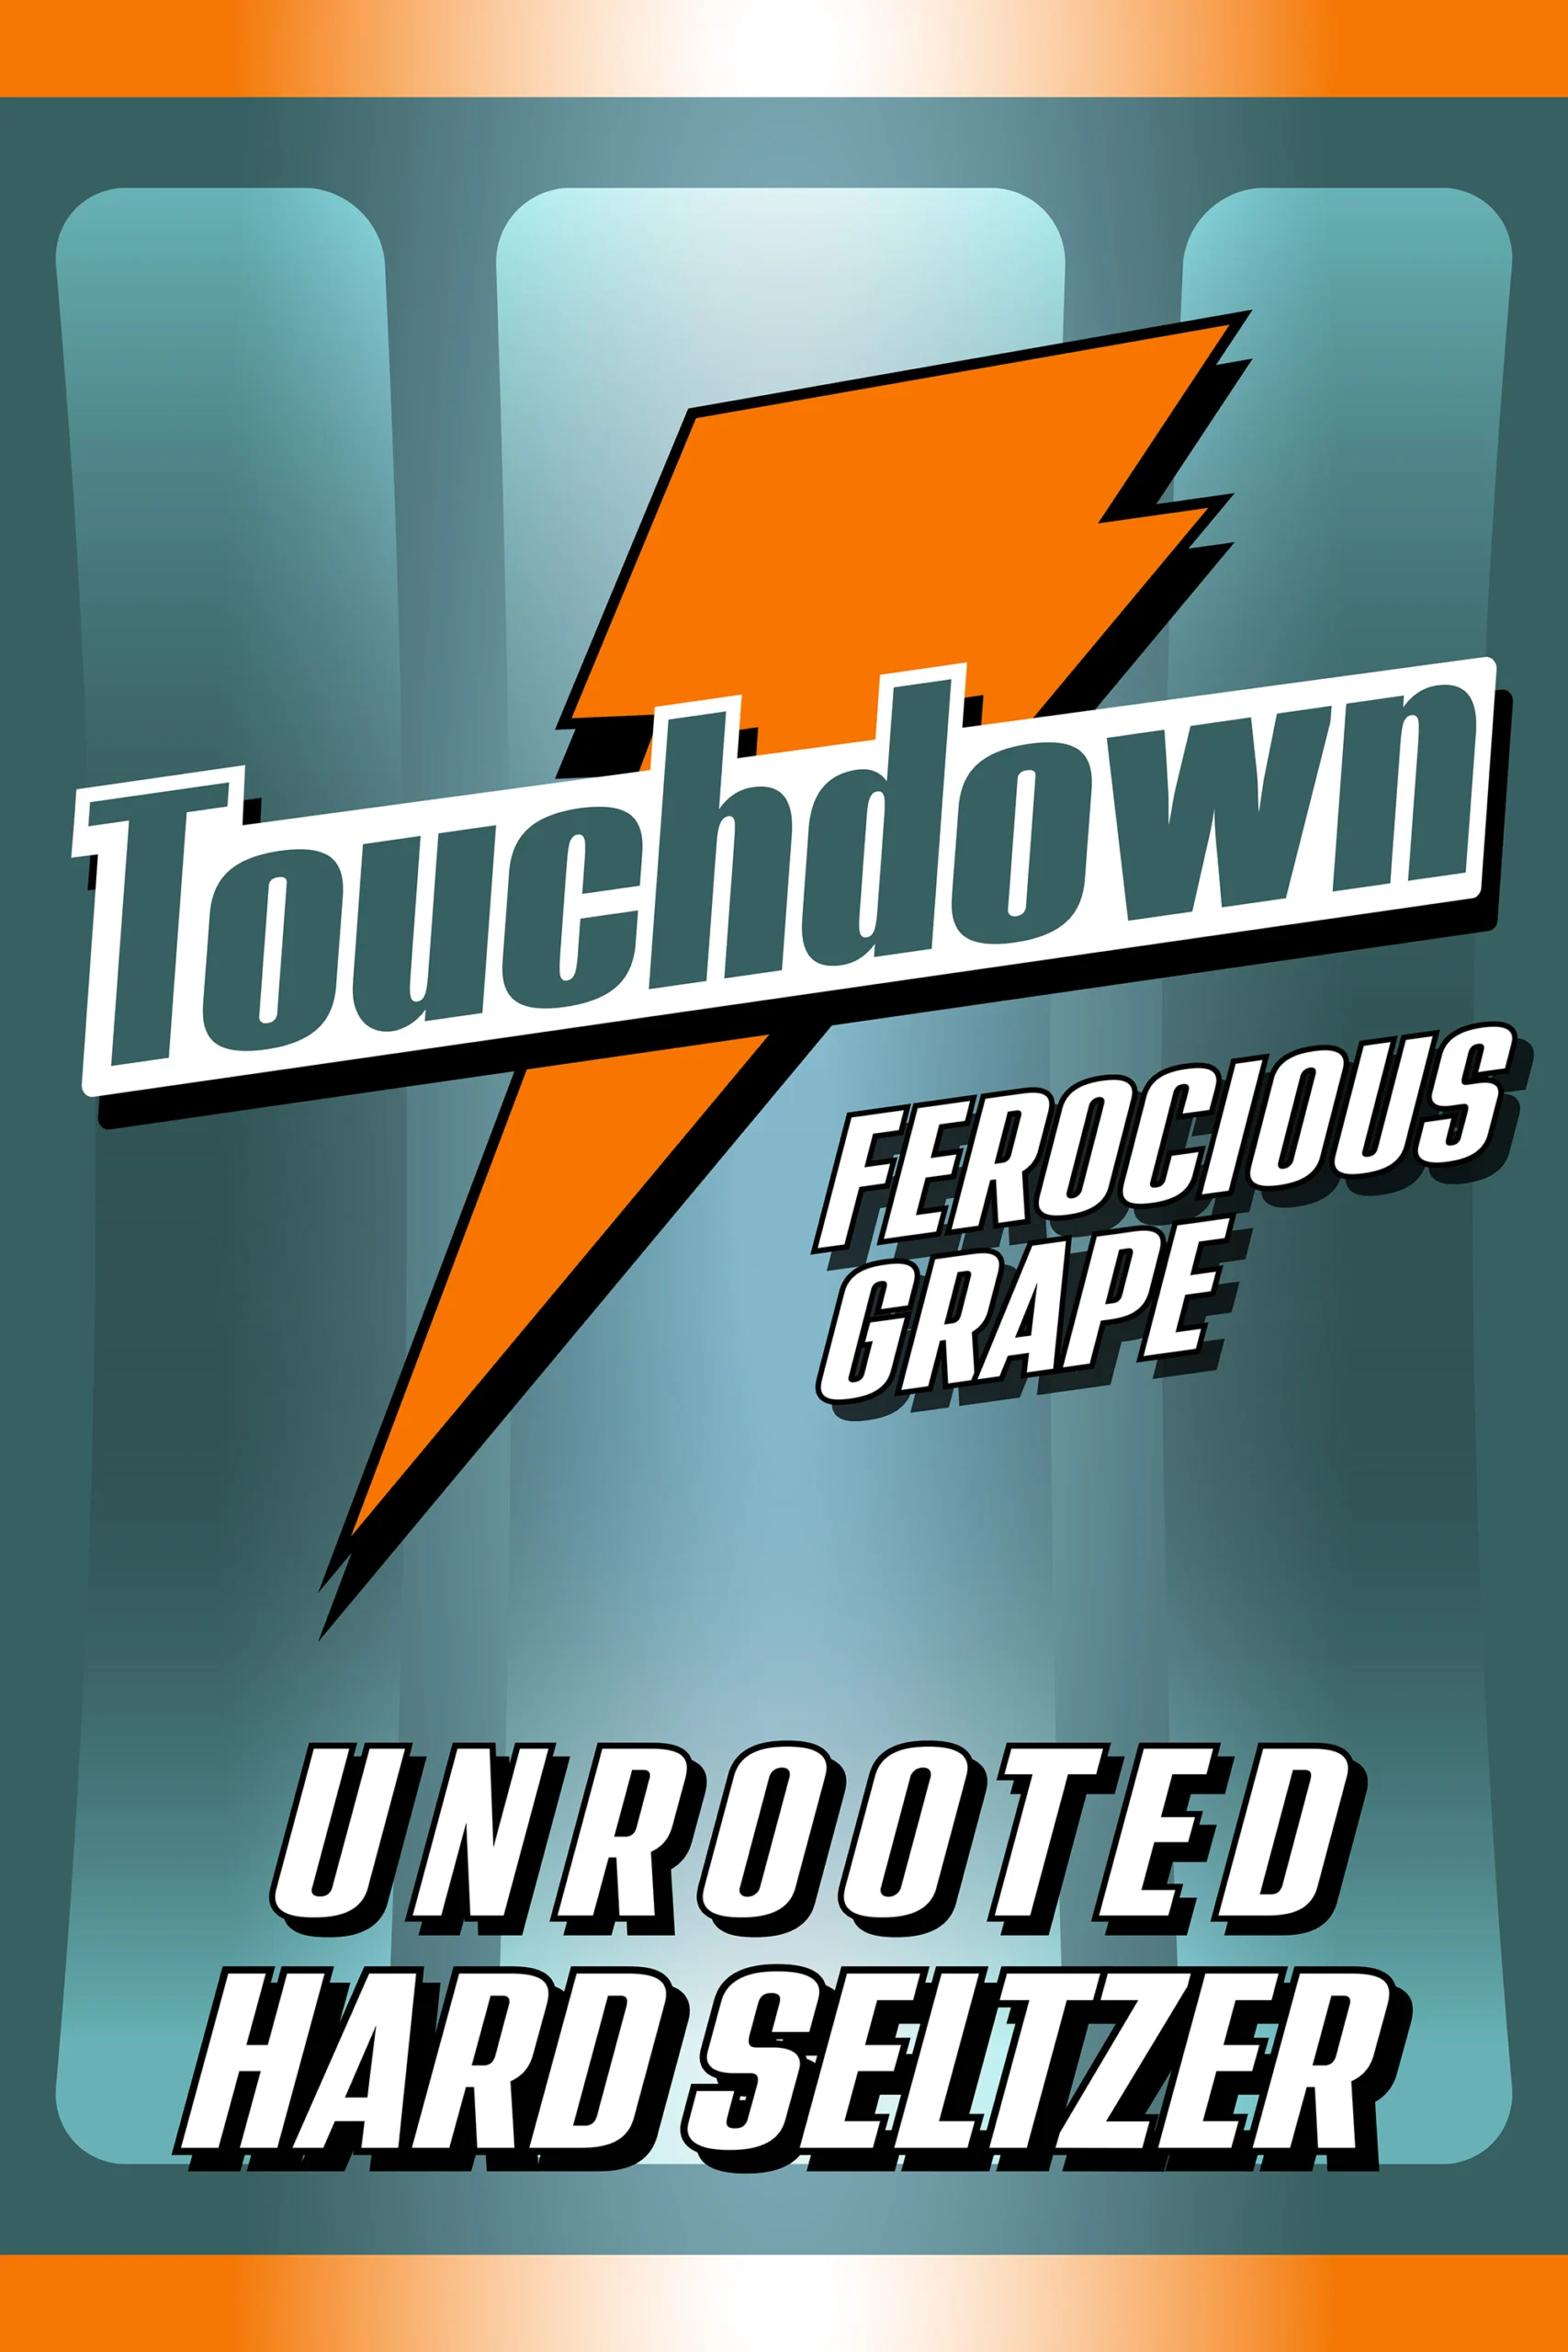 Poster representing the beverage TOUCHDOWN, a HARD SELTZER with an alcohol content of 5%, available on tap at Transplants Brewing